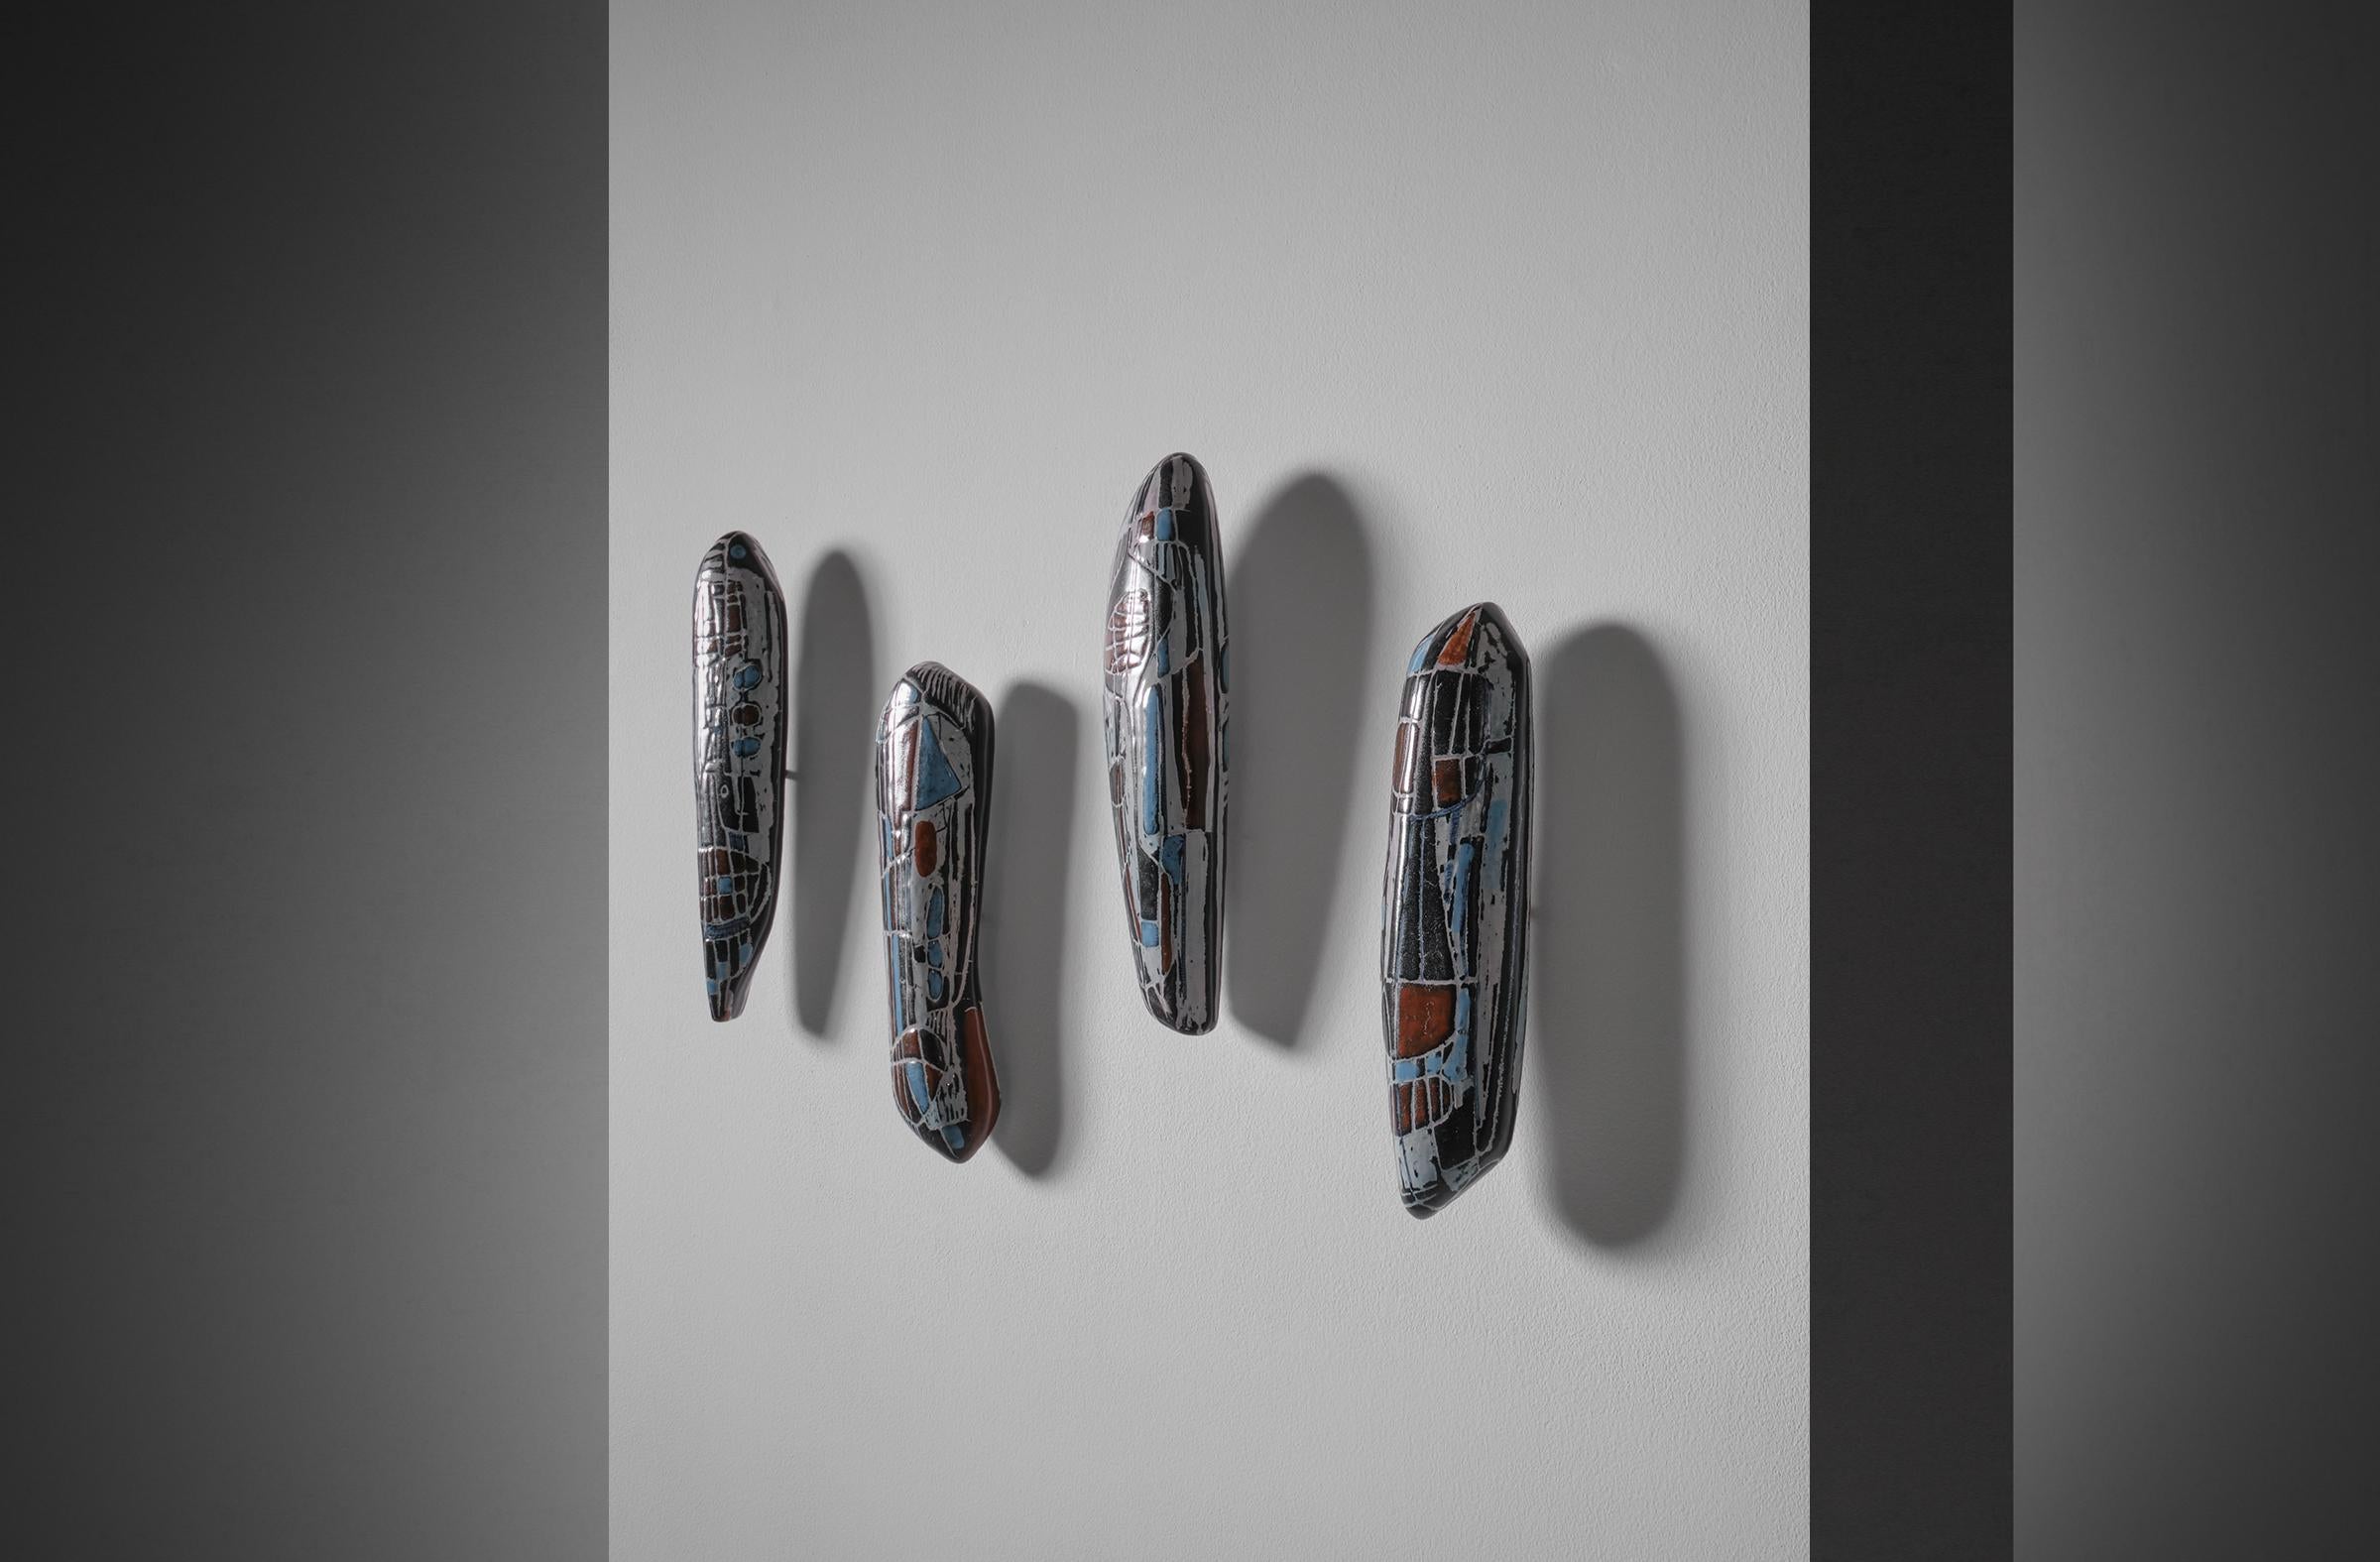 Set of four ceramic coat hangers by Victor (Vittorio) Cerrato (1917 - 2008), Italy 1960s. Cerrato was both sculptor and ceramist, he opened his ceramic workshop in Turin in the early years after the Second World War. His work is very artistic and